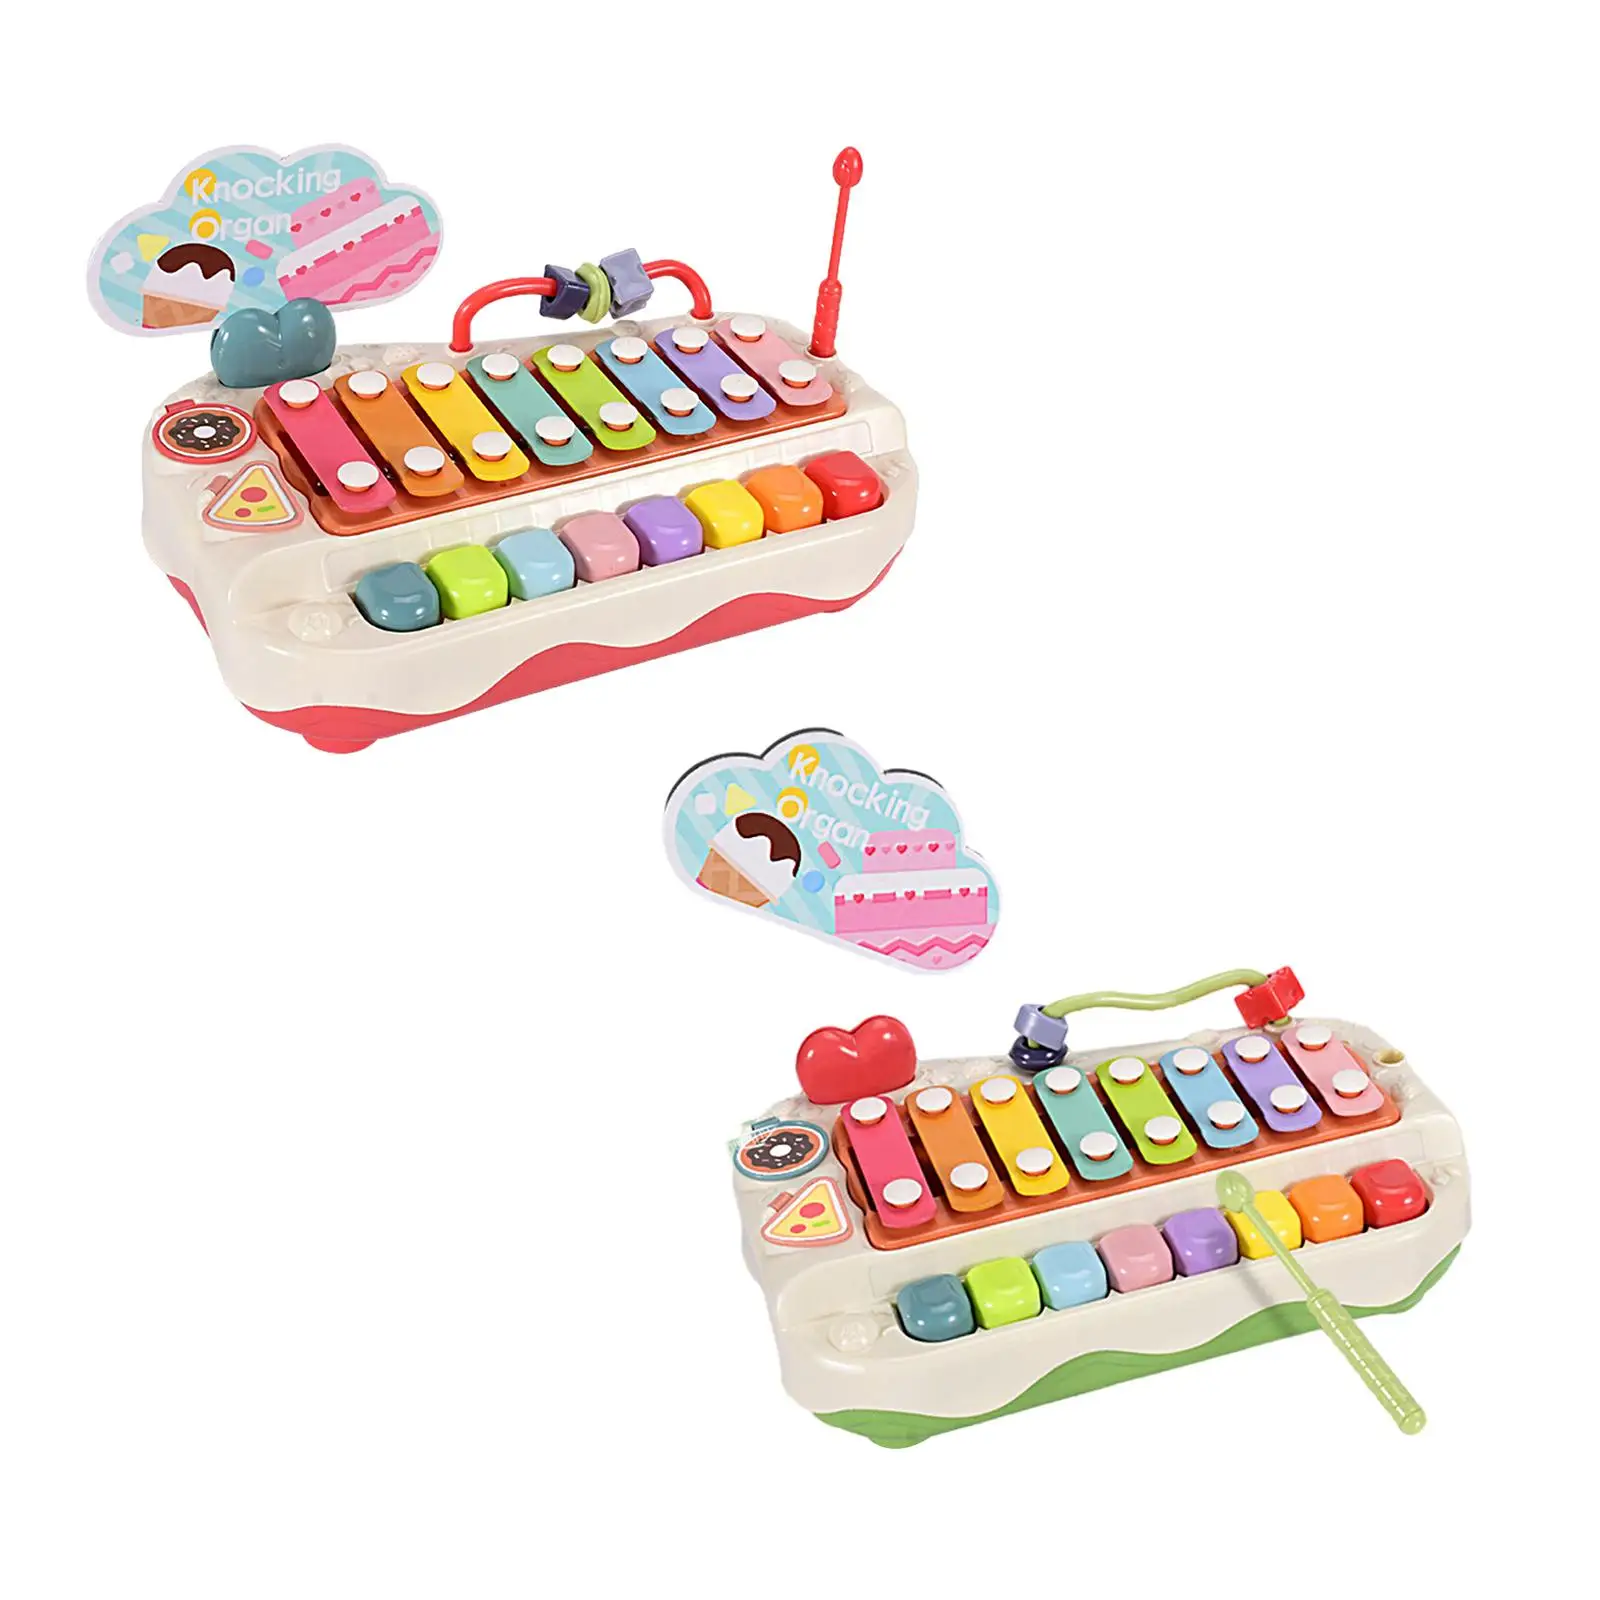 Kids Musical Toy Educational Colorful Preschool Eight Tone Piano Keyboard Toy for Baby 1 2 3 Years Old Kids Holiday Gifts